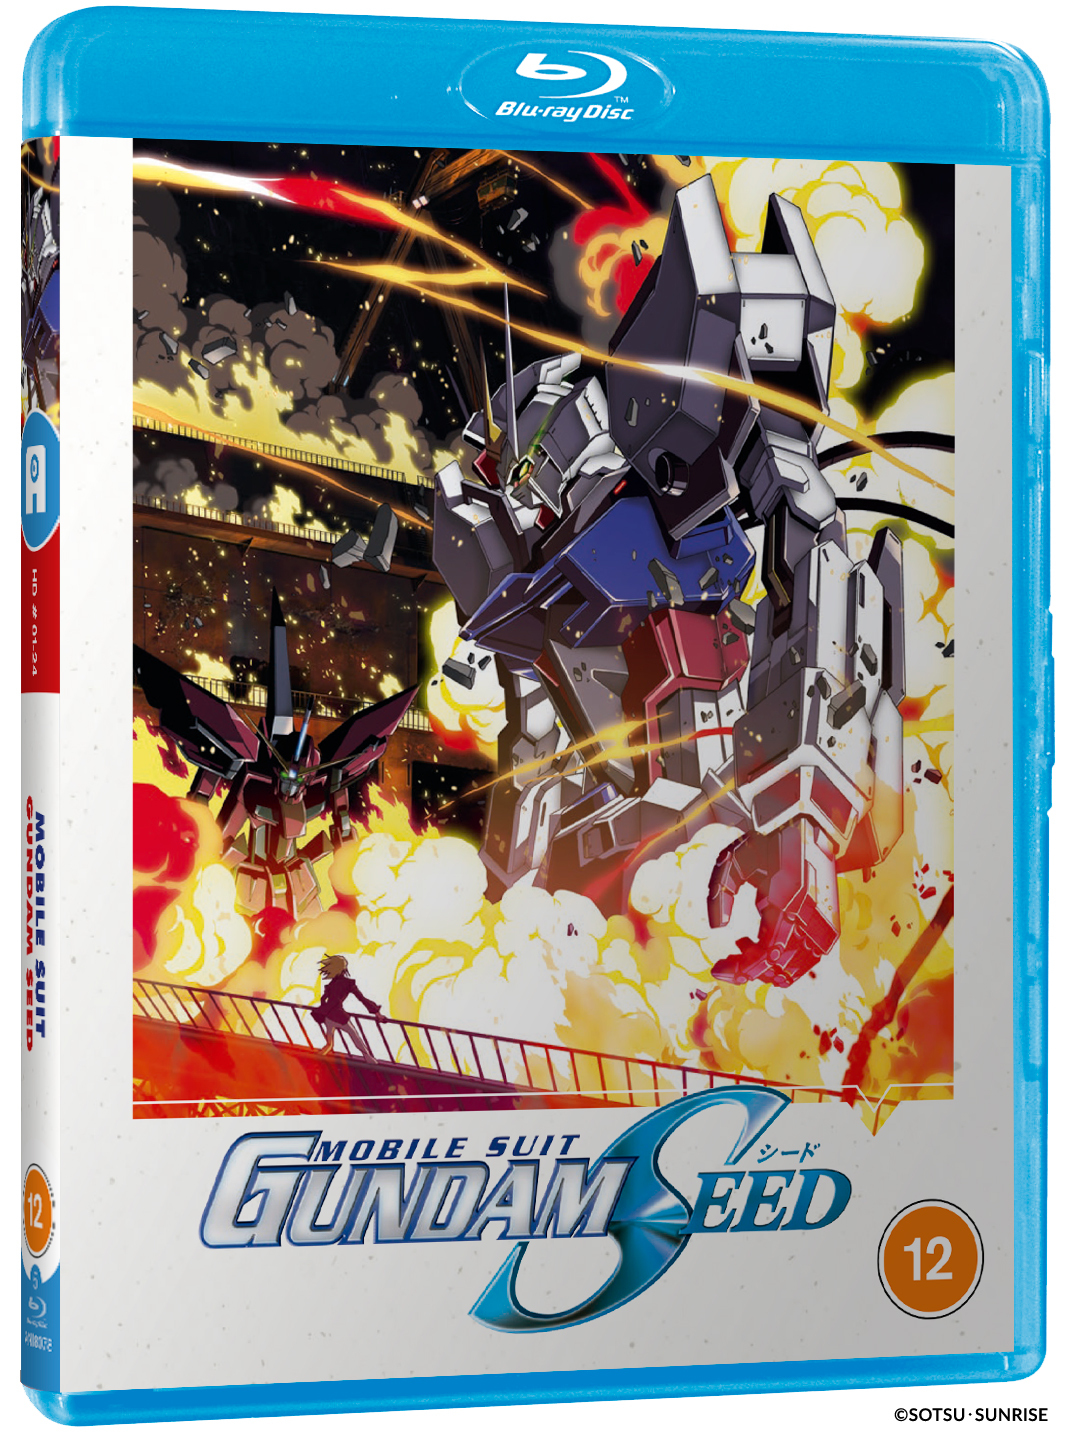 Mobile Suit Gundam Seed: Part 1 (Blu-ray) - Photo 1/1